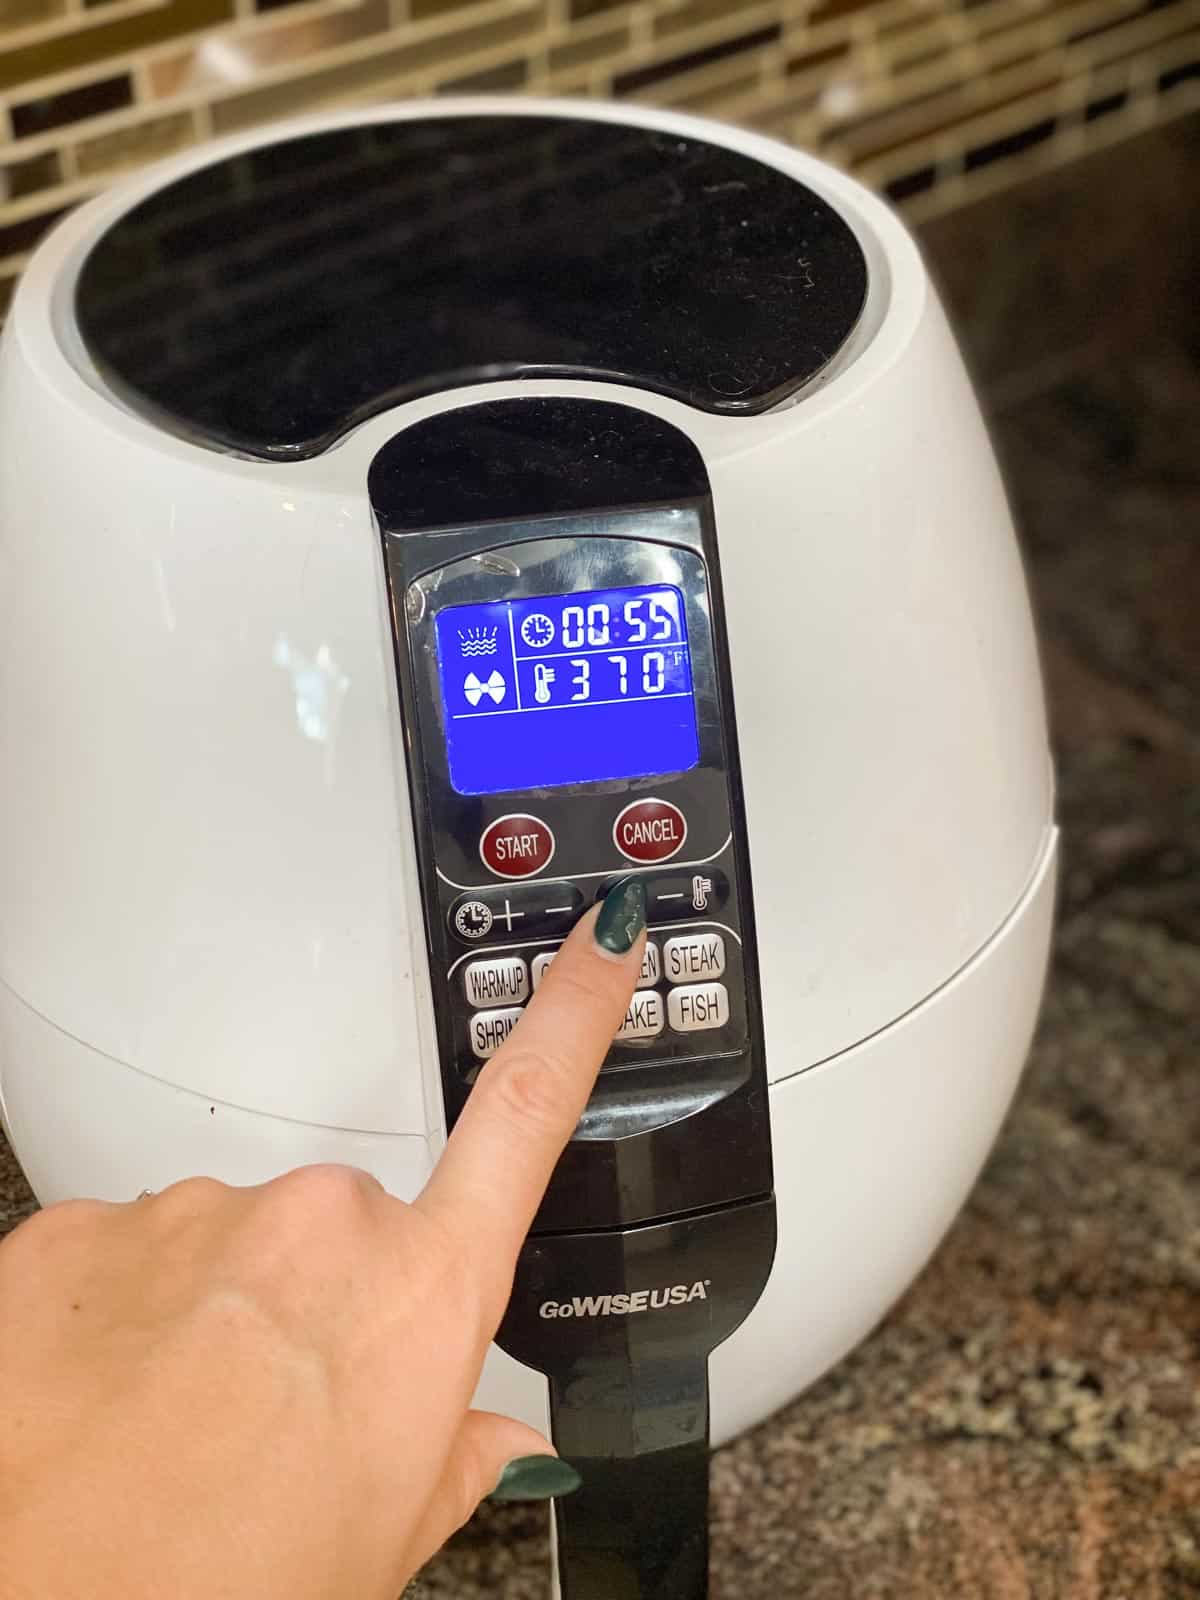 Set air fryer to 6 minutes for frozen waffles